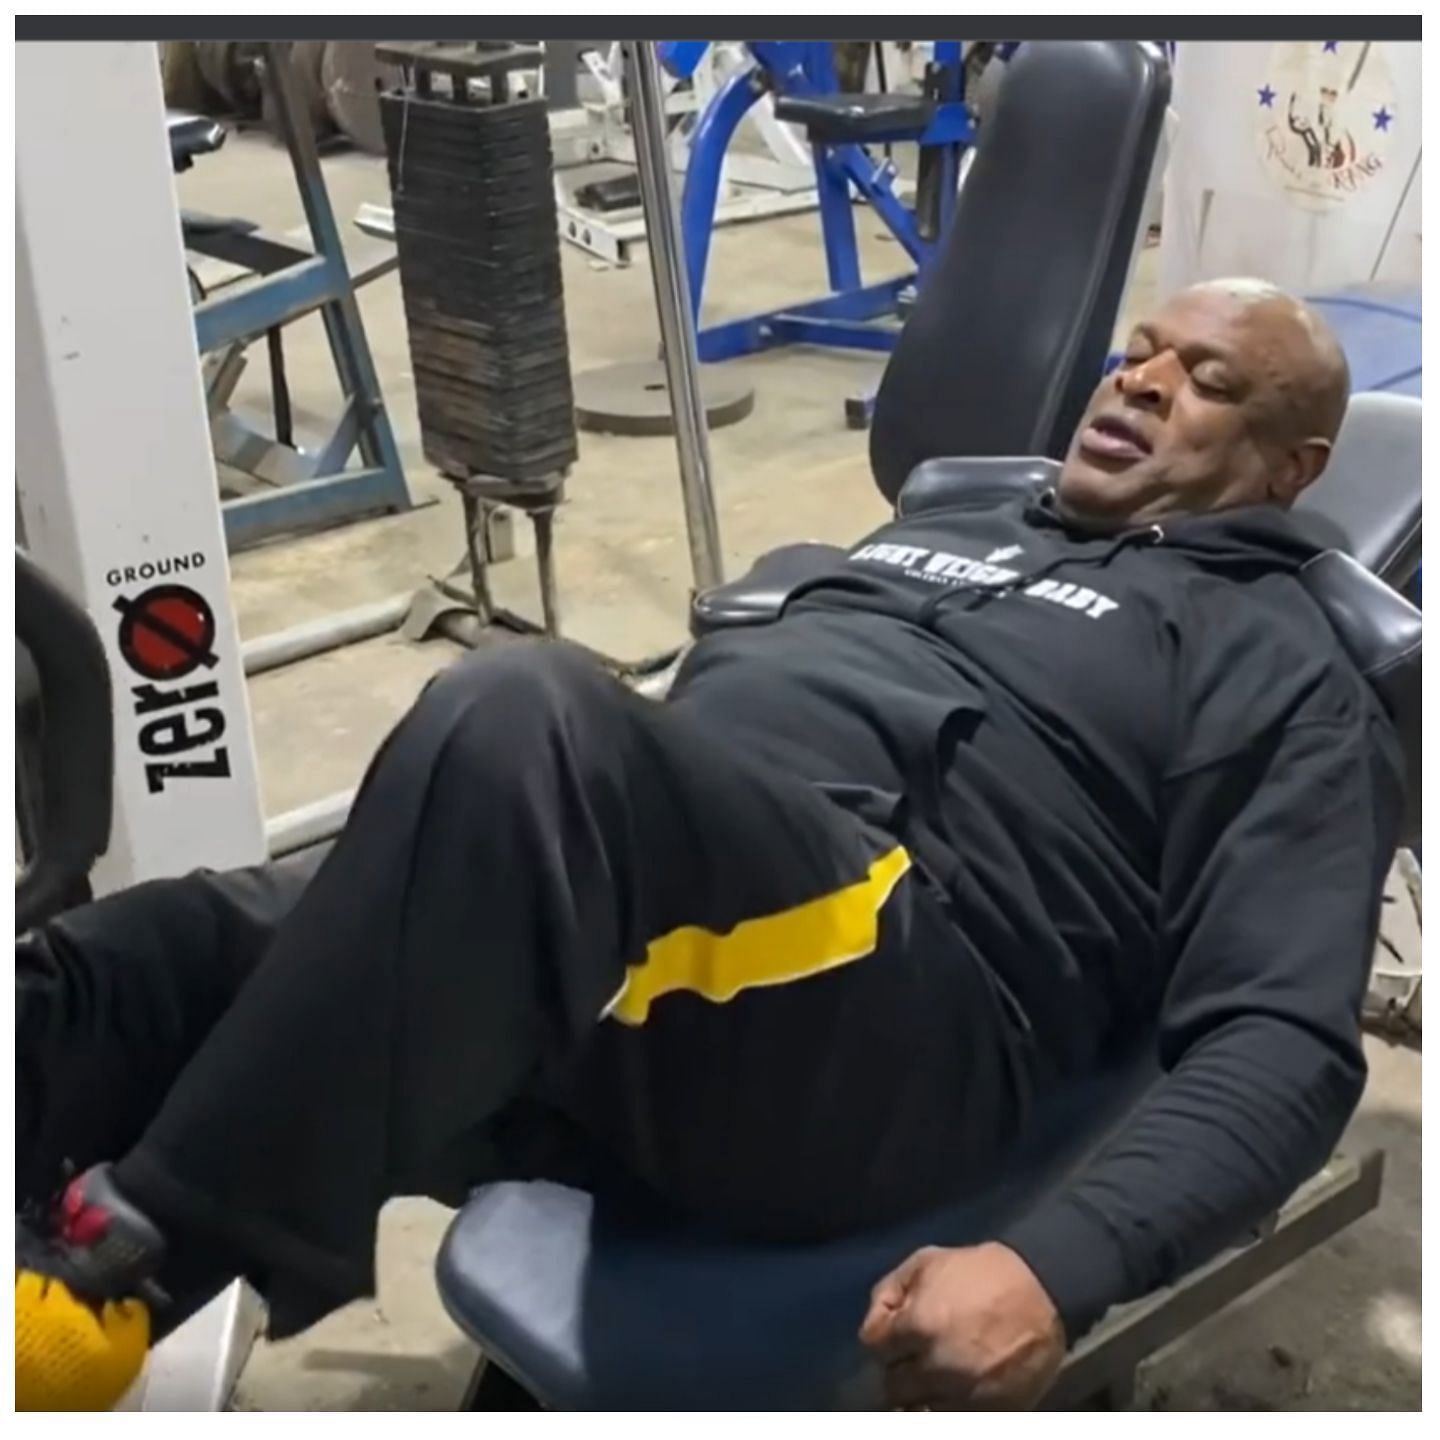 Coleman works his legs on the leg press machine at MetroFlex Gym in Texas after stem cell treatment that allowed him to gain nearly 30 pounds in weight: Image via Instagram (@ronniecoleman8)